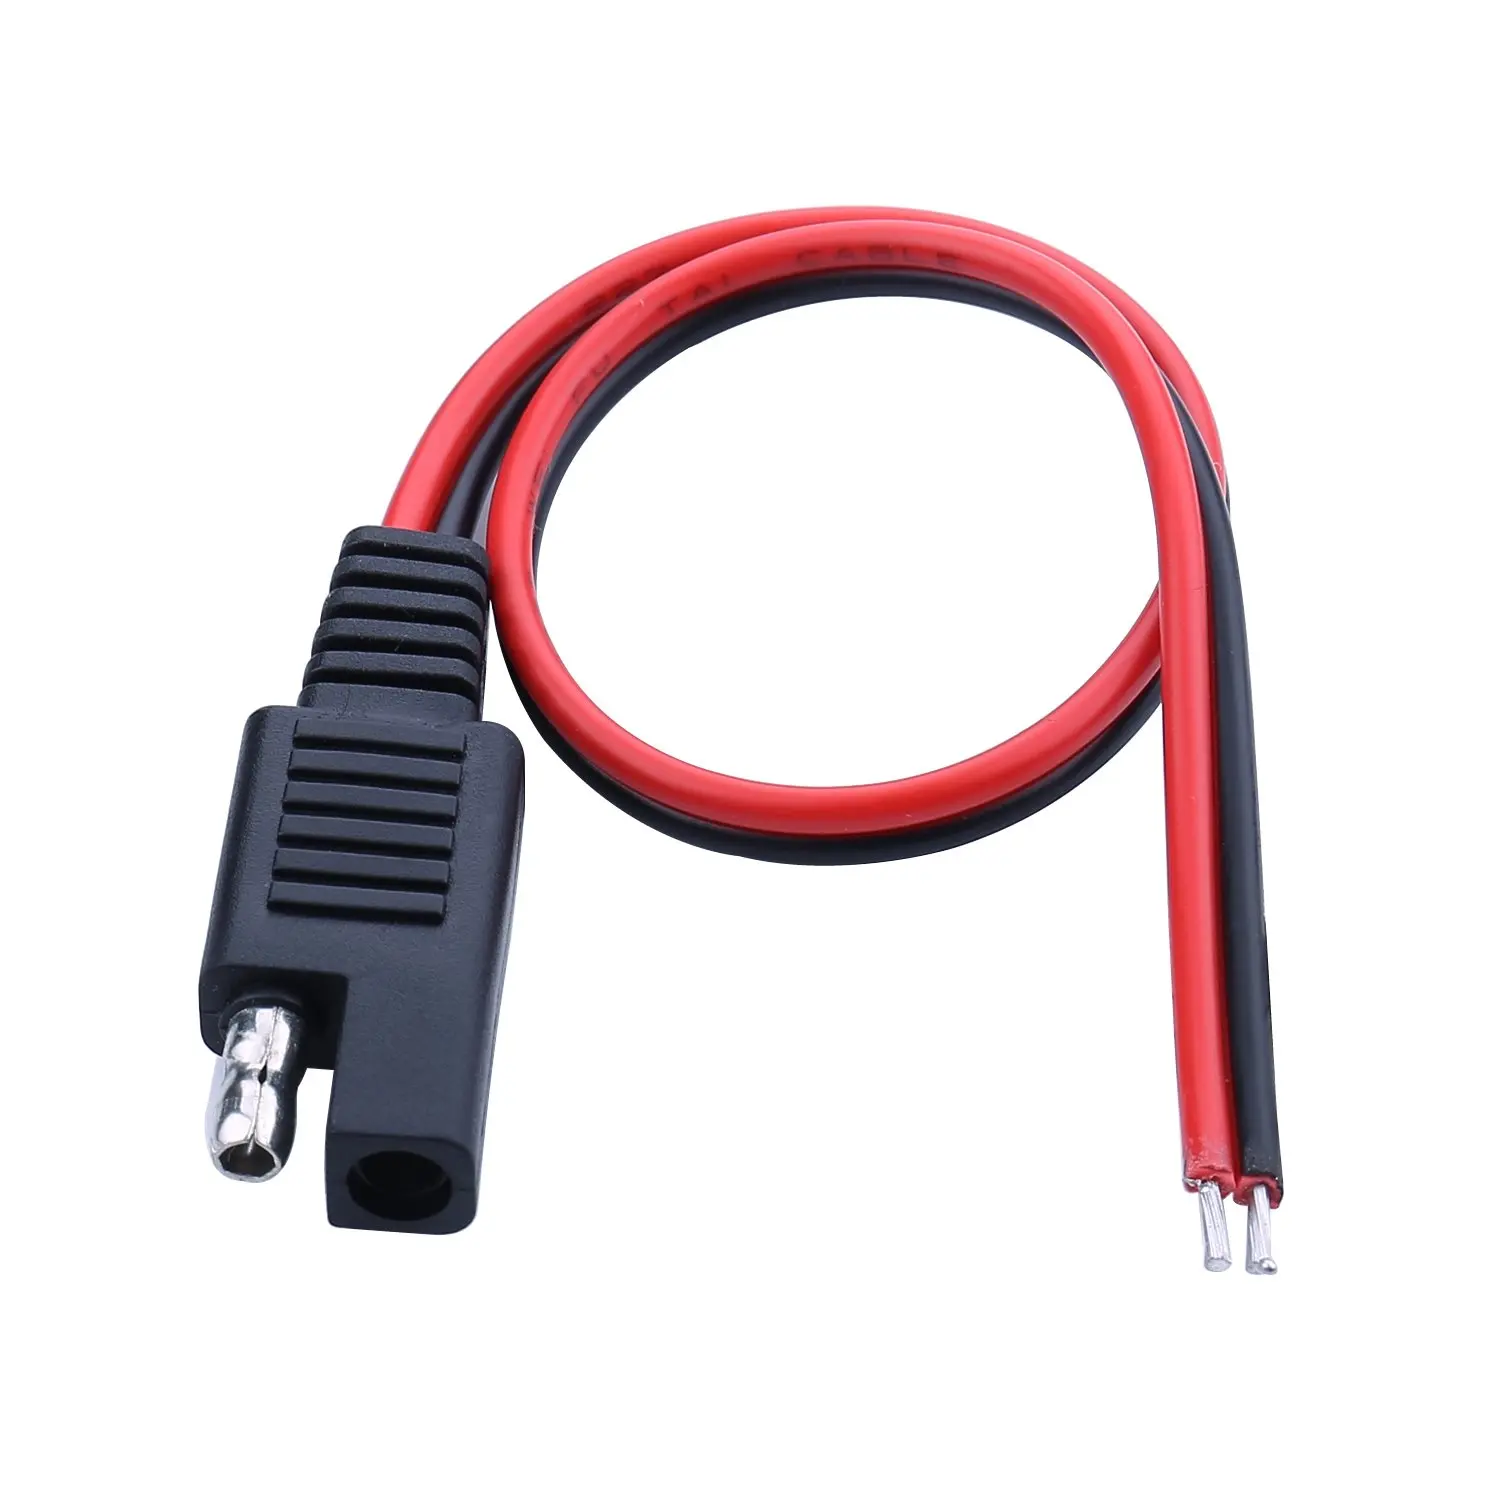 18 Gauge Quick Disconnect Connect SAE Waterproof Wire Harness Plug 